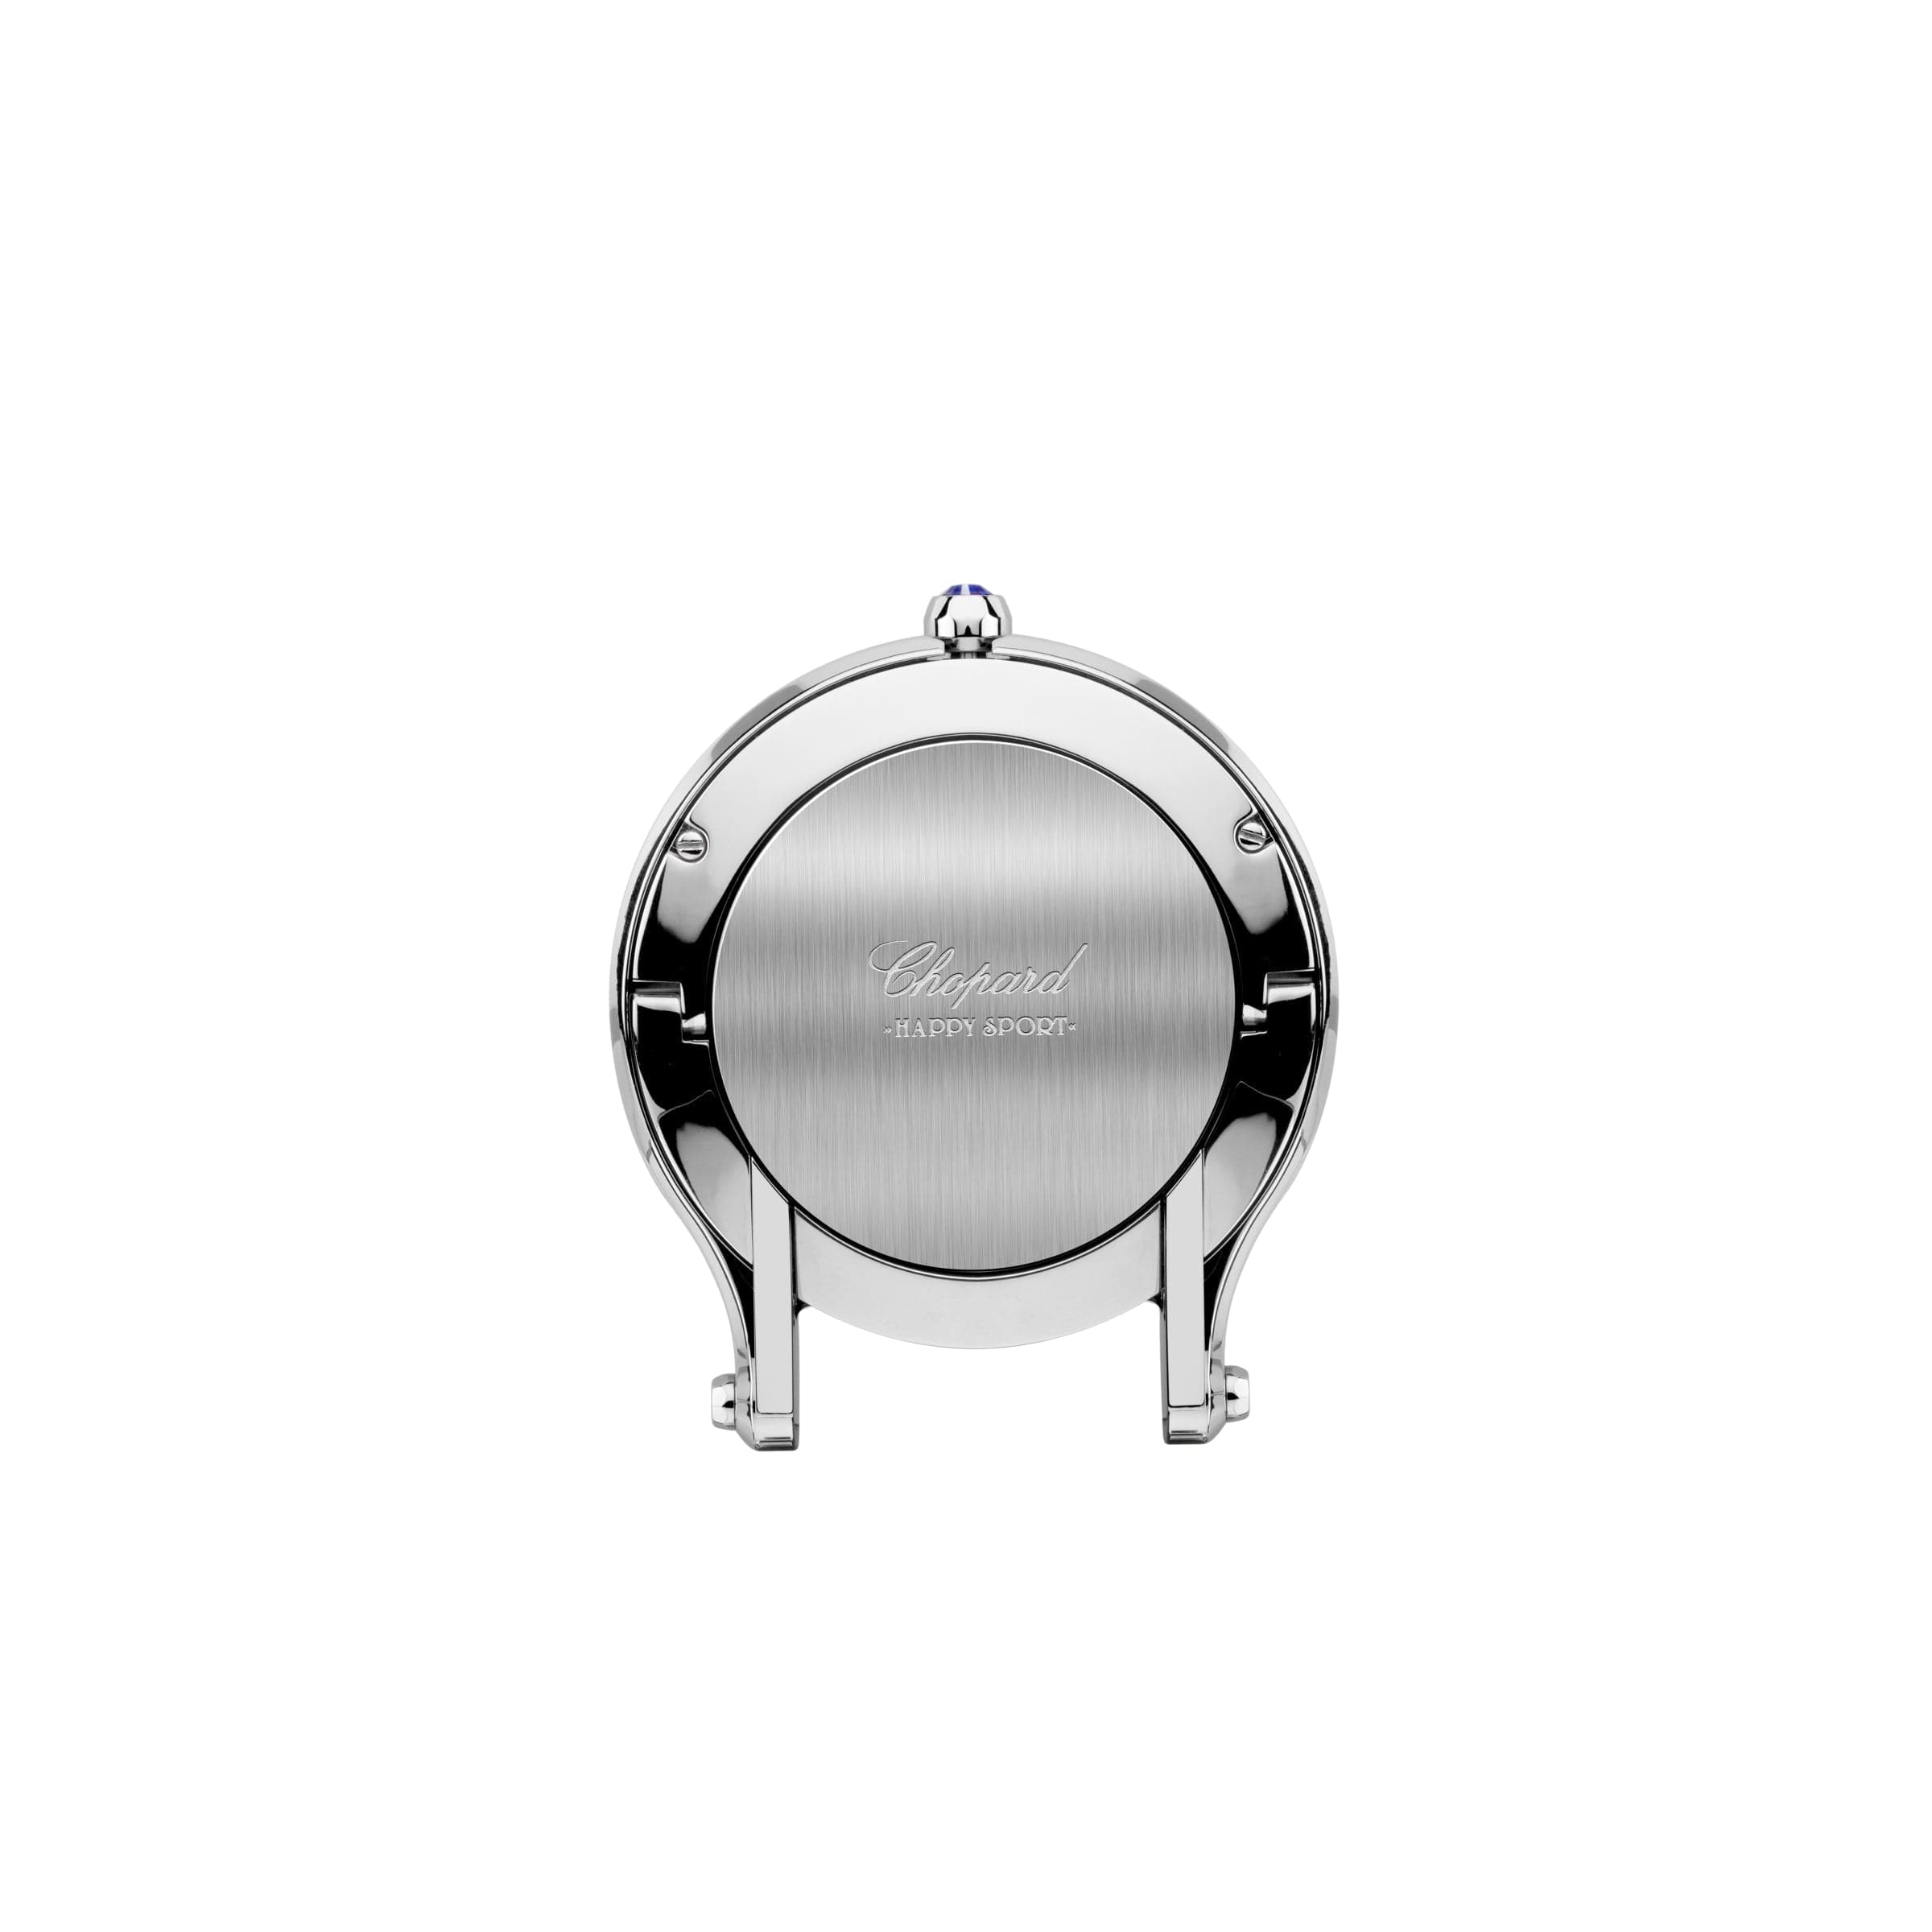 HAPPY SPORT TABLE CLOCK STAINLESS STEEL - Kamal Watch Company